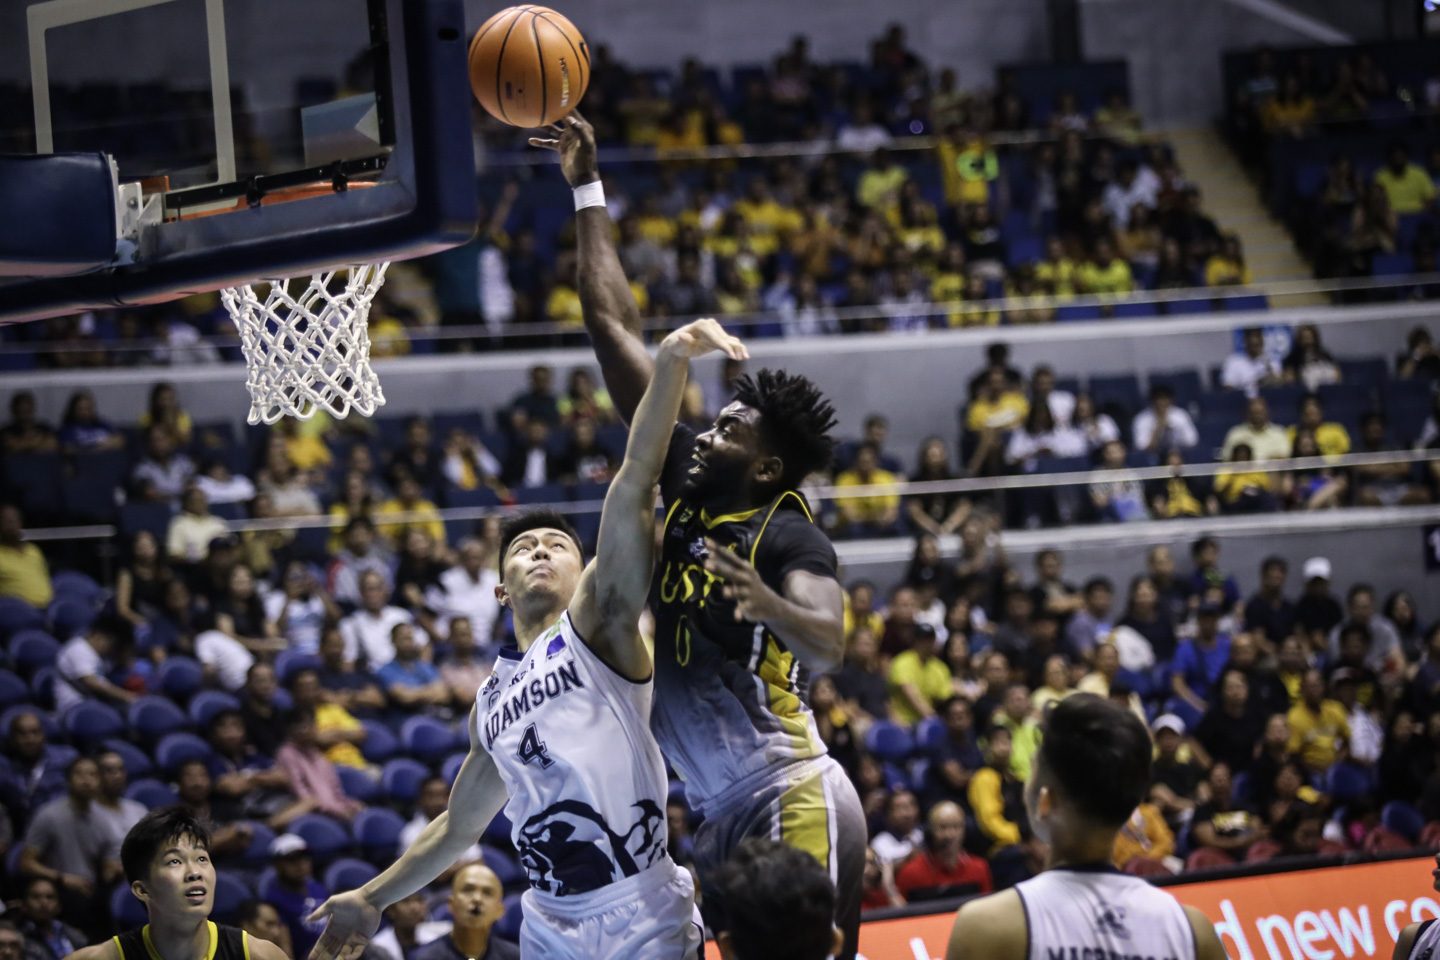 UST’s Steve Akomo confined due to concussion